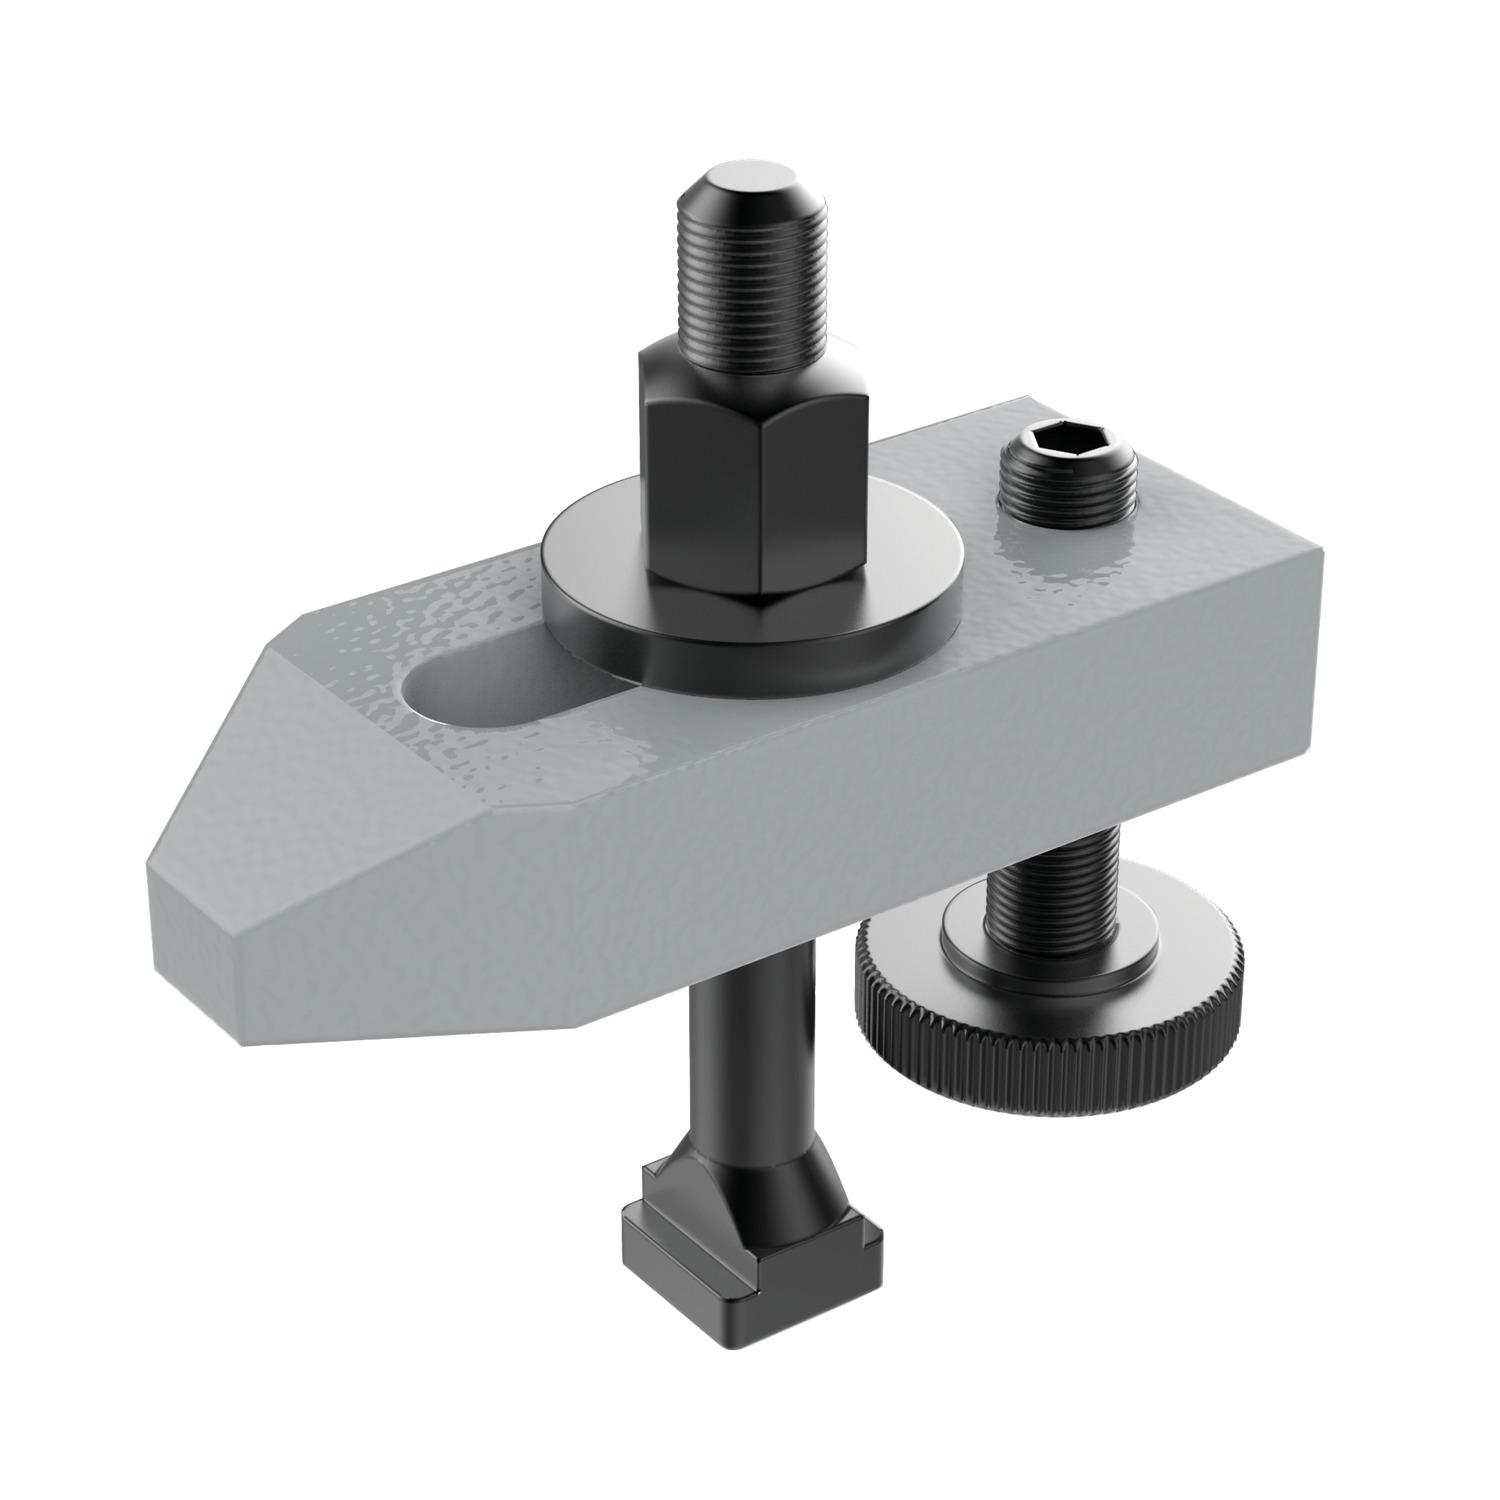 Product 10400, Adjustable Plain Clamps with height adjusting screw / 